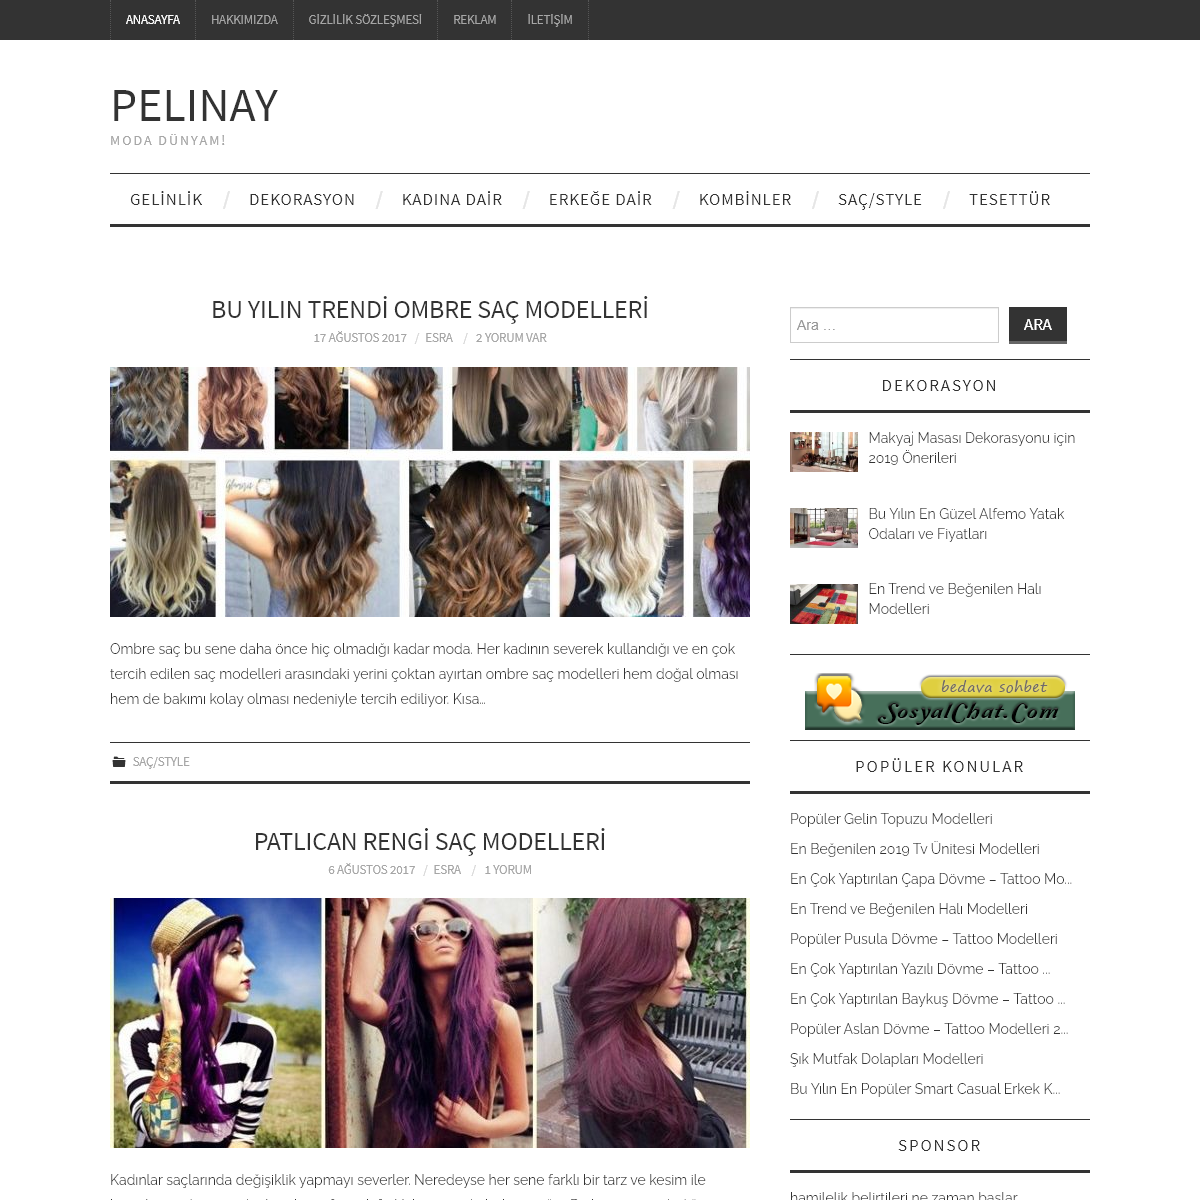 A complete backup of pelinay.com